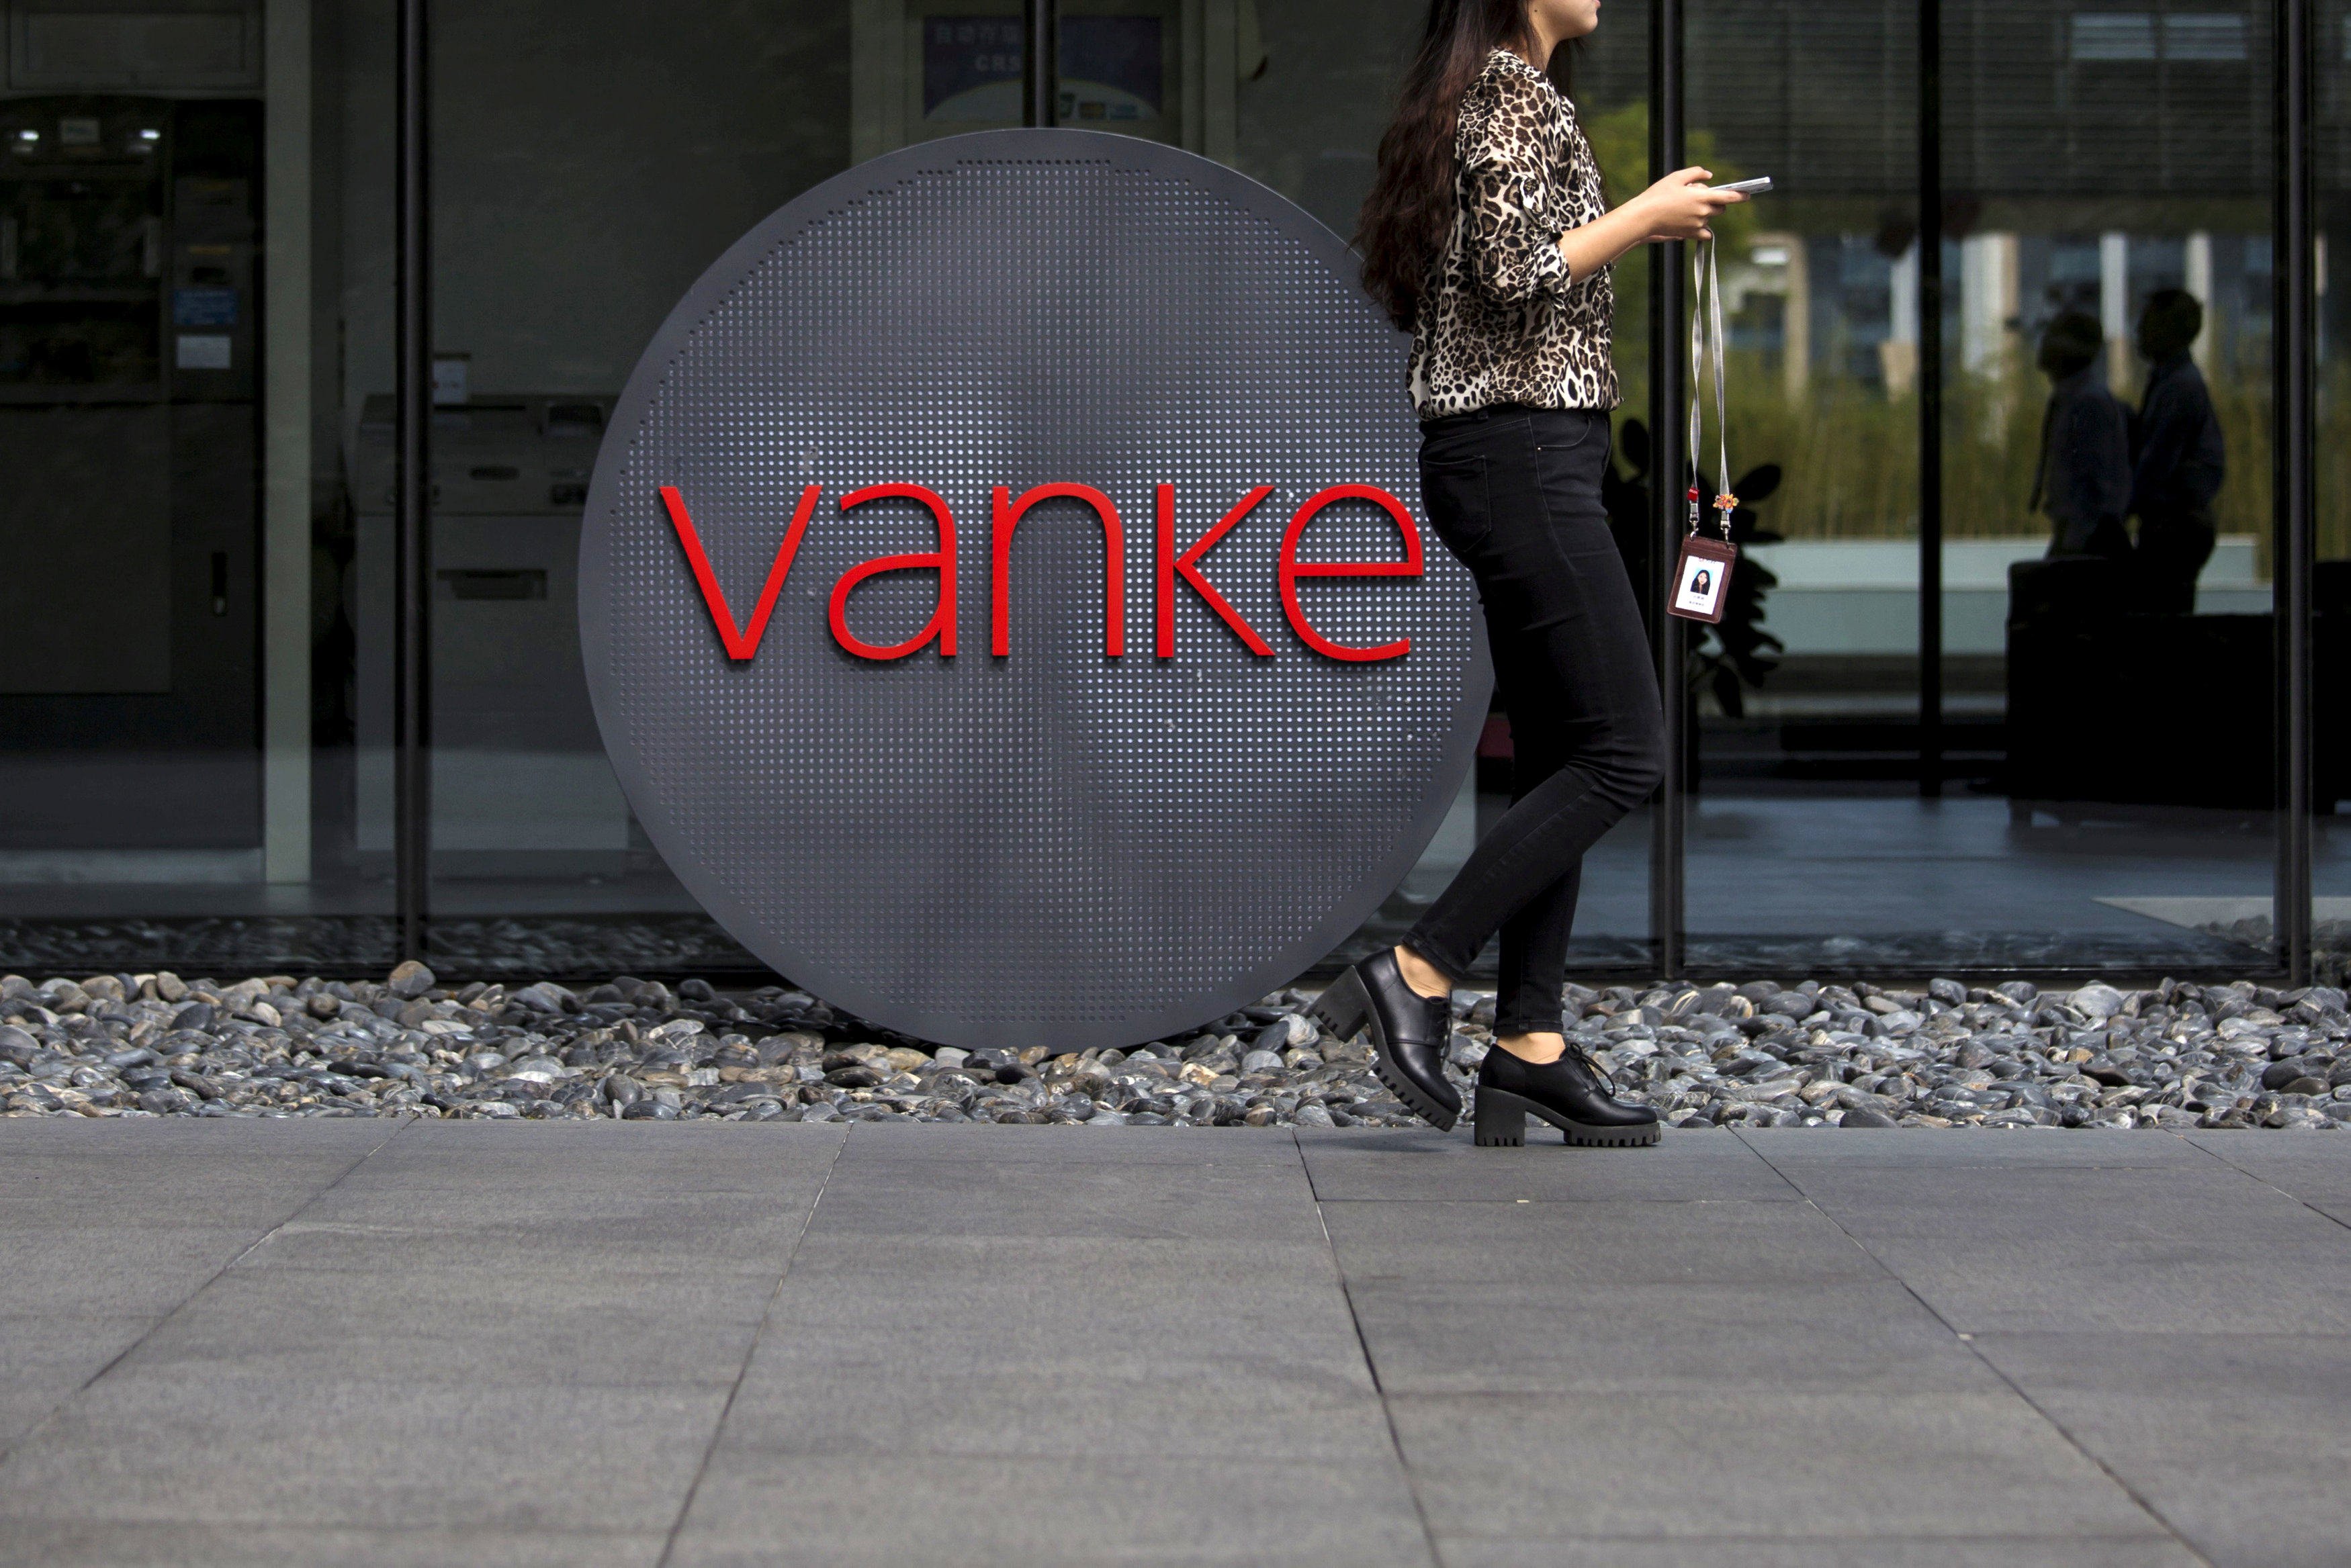 China Vanke was one of many major developers that ran into serious liquidity problems when the authorities imposed Beijing’s ‘three red lines’ restrictions to rein in debt in the property sector. Photo: Reuters